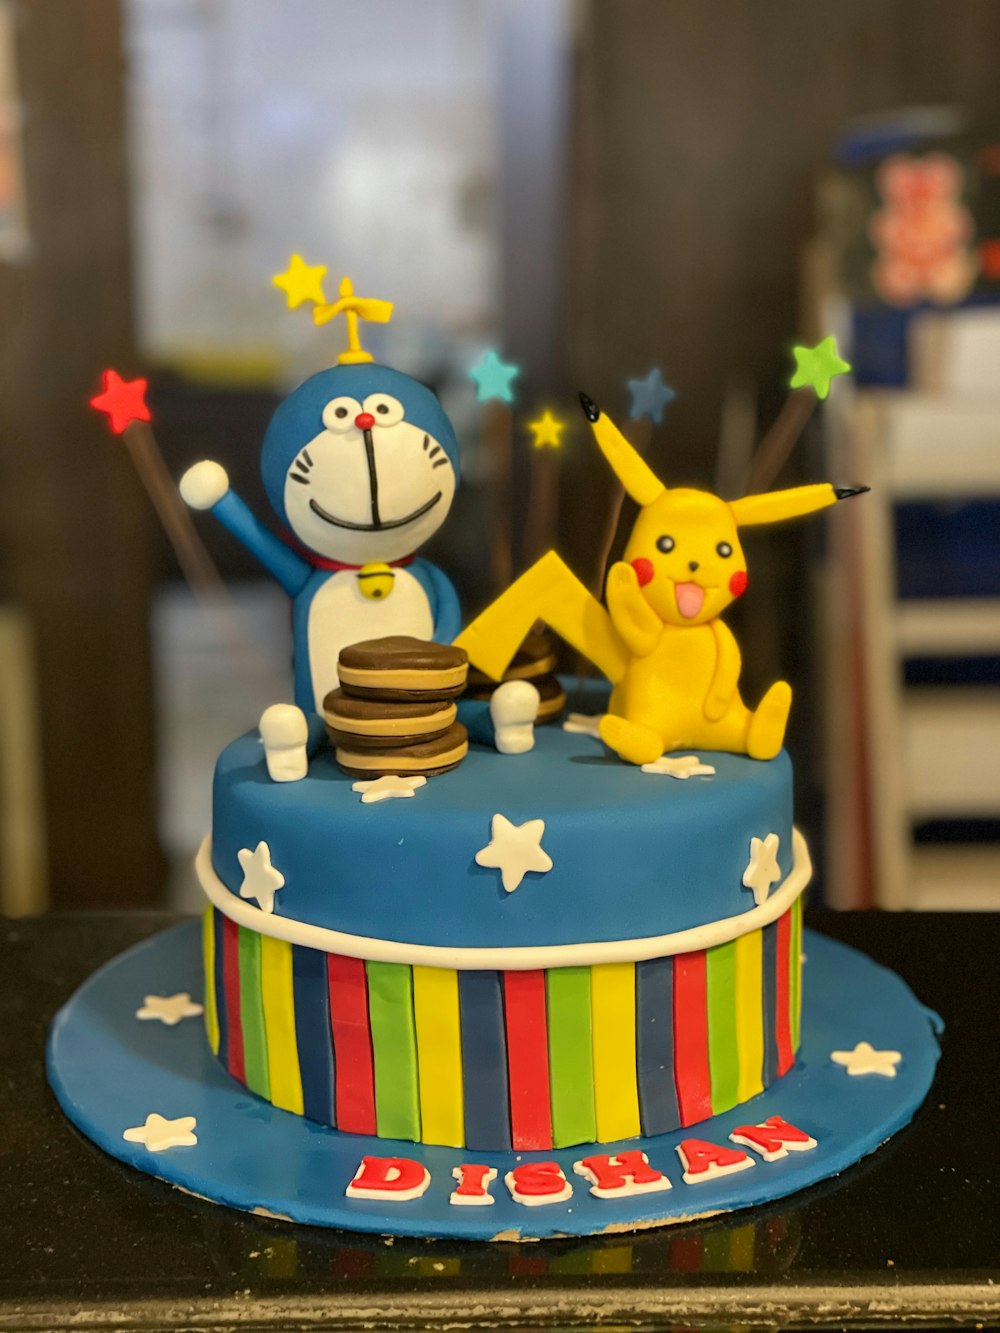 a birthday cake with a pikachu figure on top of it